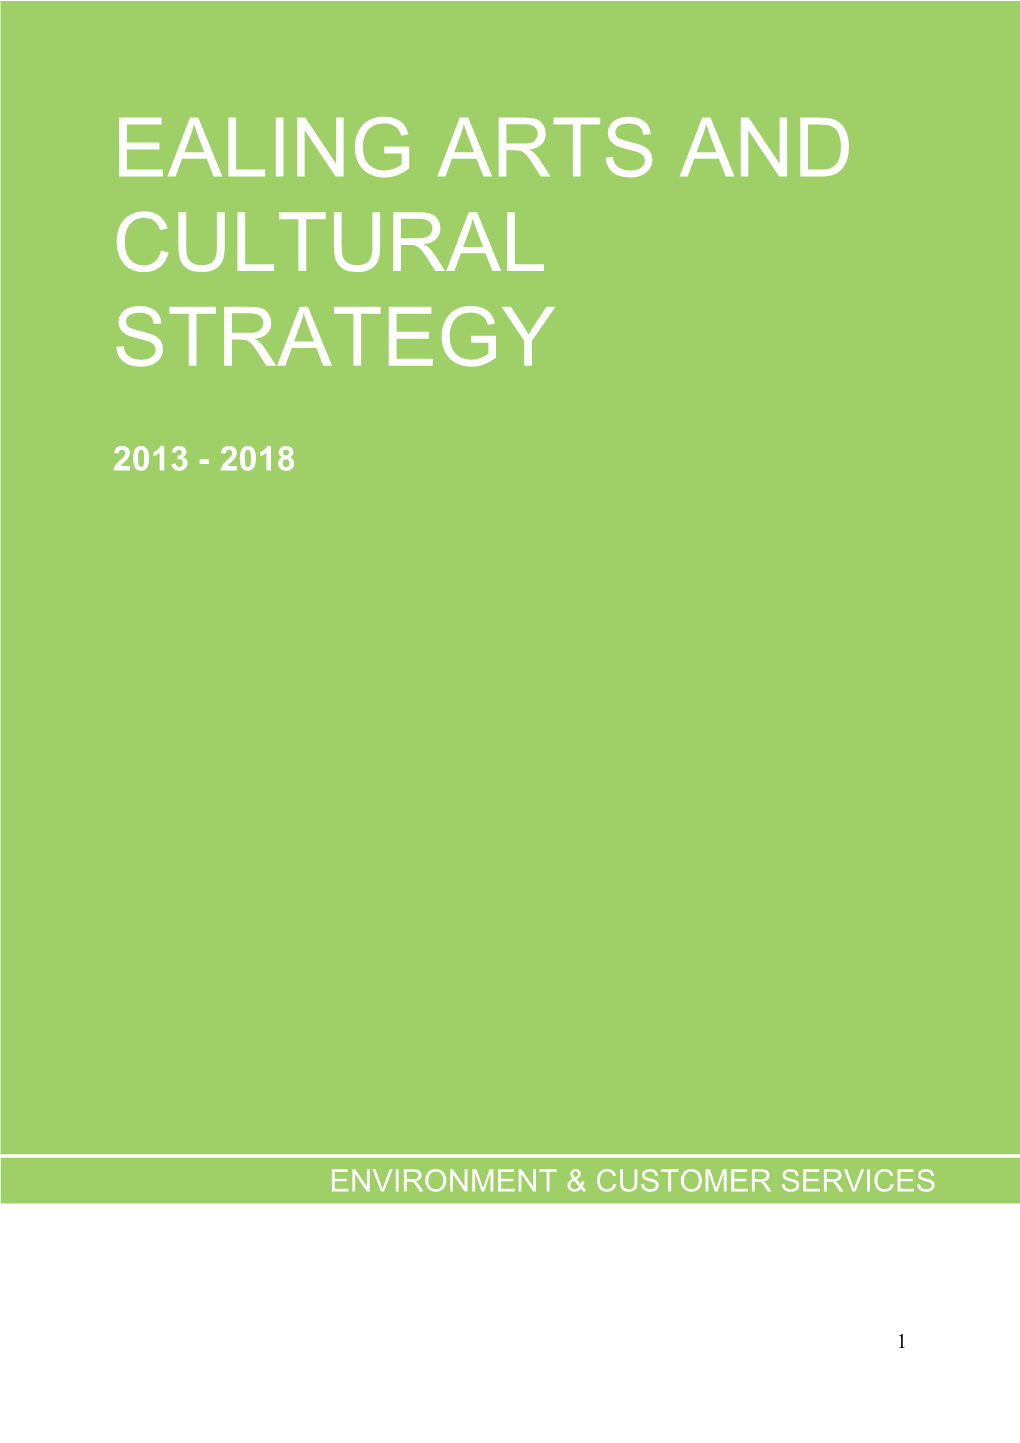 Ealing Arts and Cultural Strategy